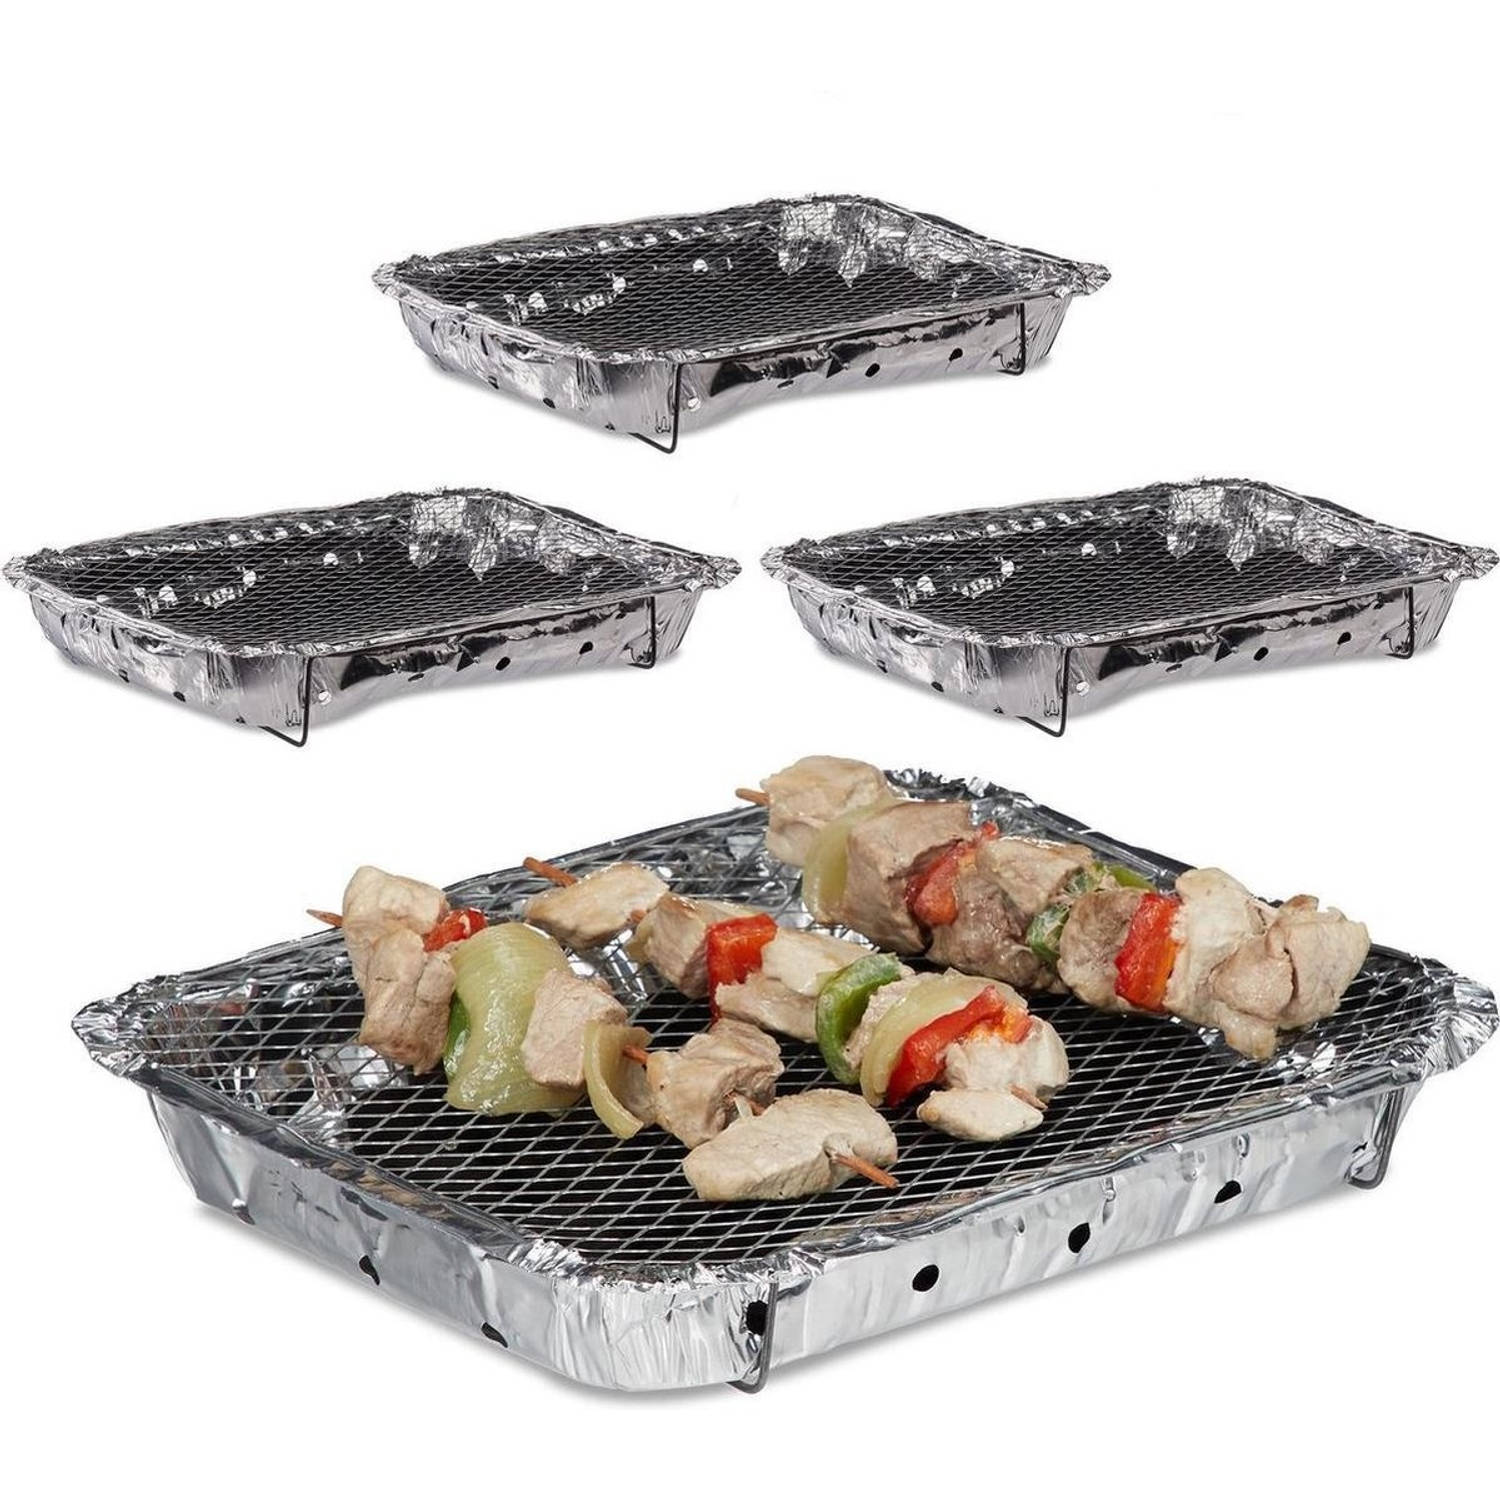 4 Stuks Barbecue Instant Wegwerp Buiten Barbecue Tafel Rooster Picknick Barbecue Accessoires Grill